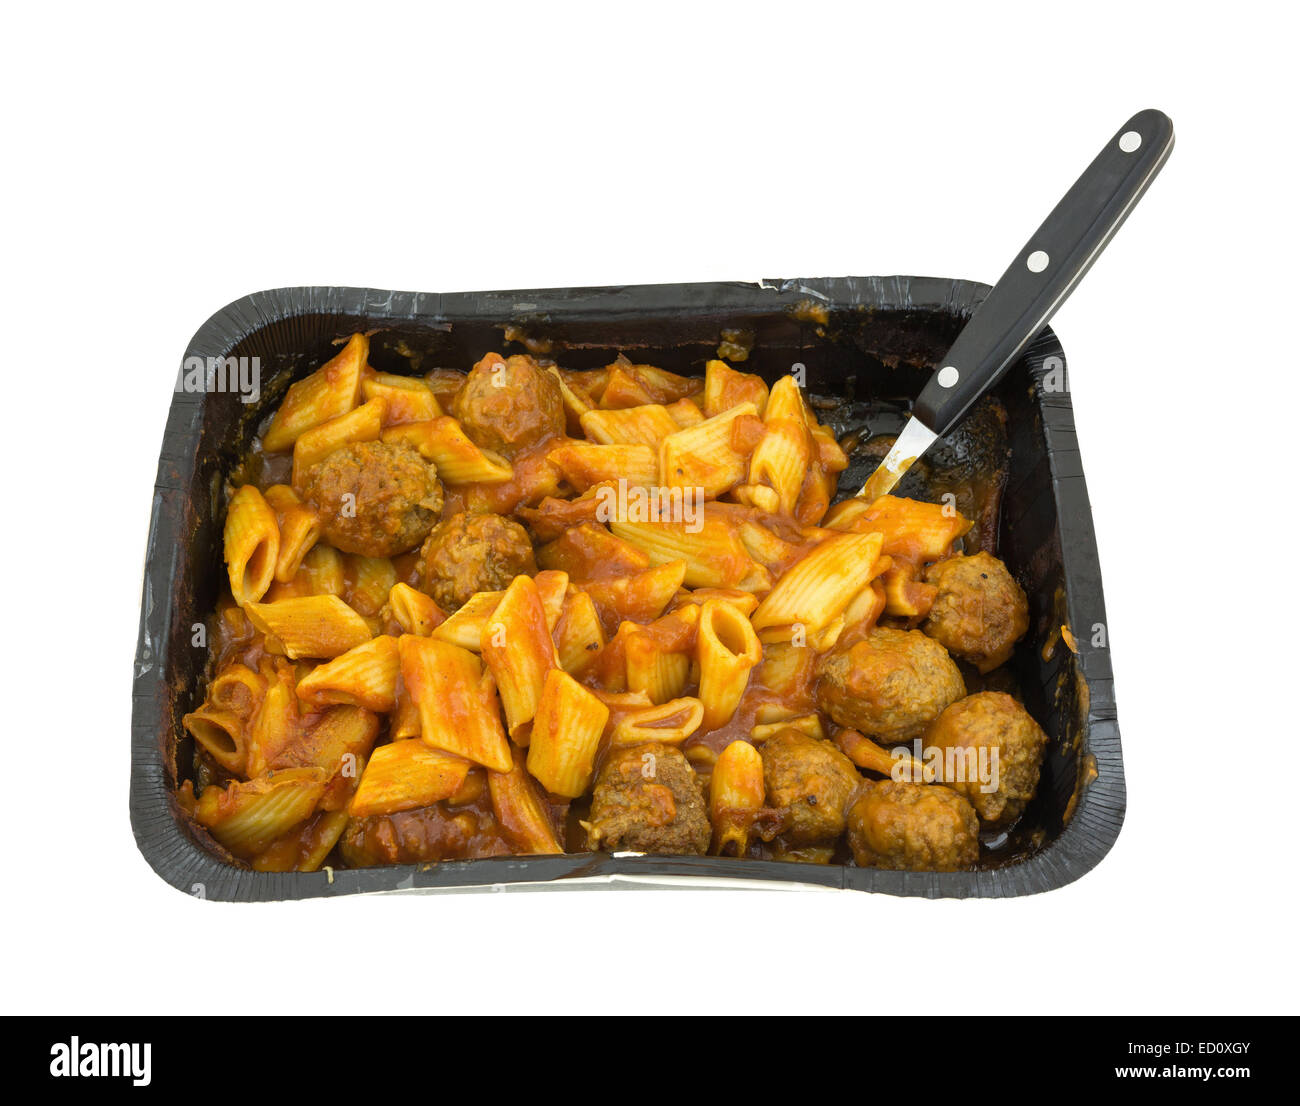 A large black tray of cooked penne pasta with meatballs in a tomato sauce and a fork against a white background. Stock Photo